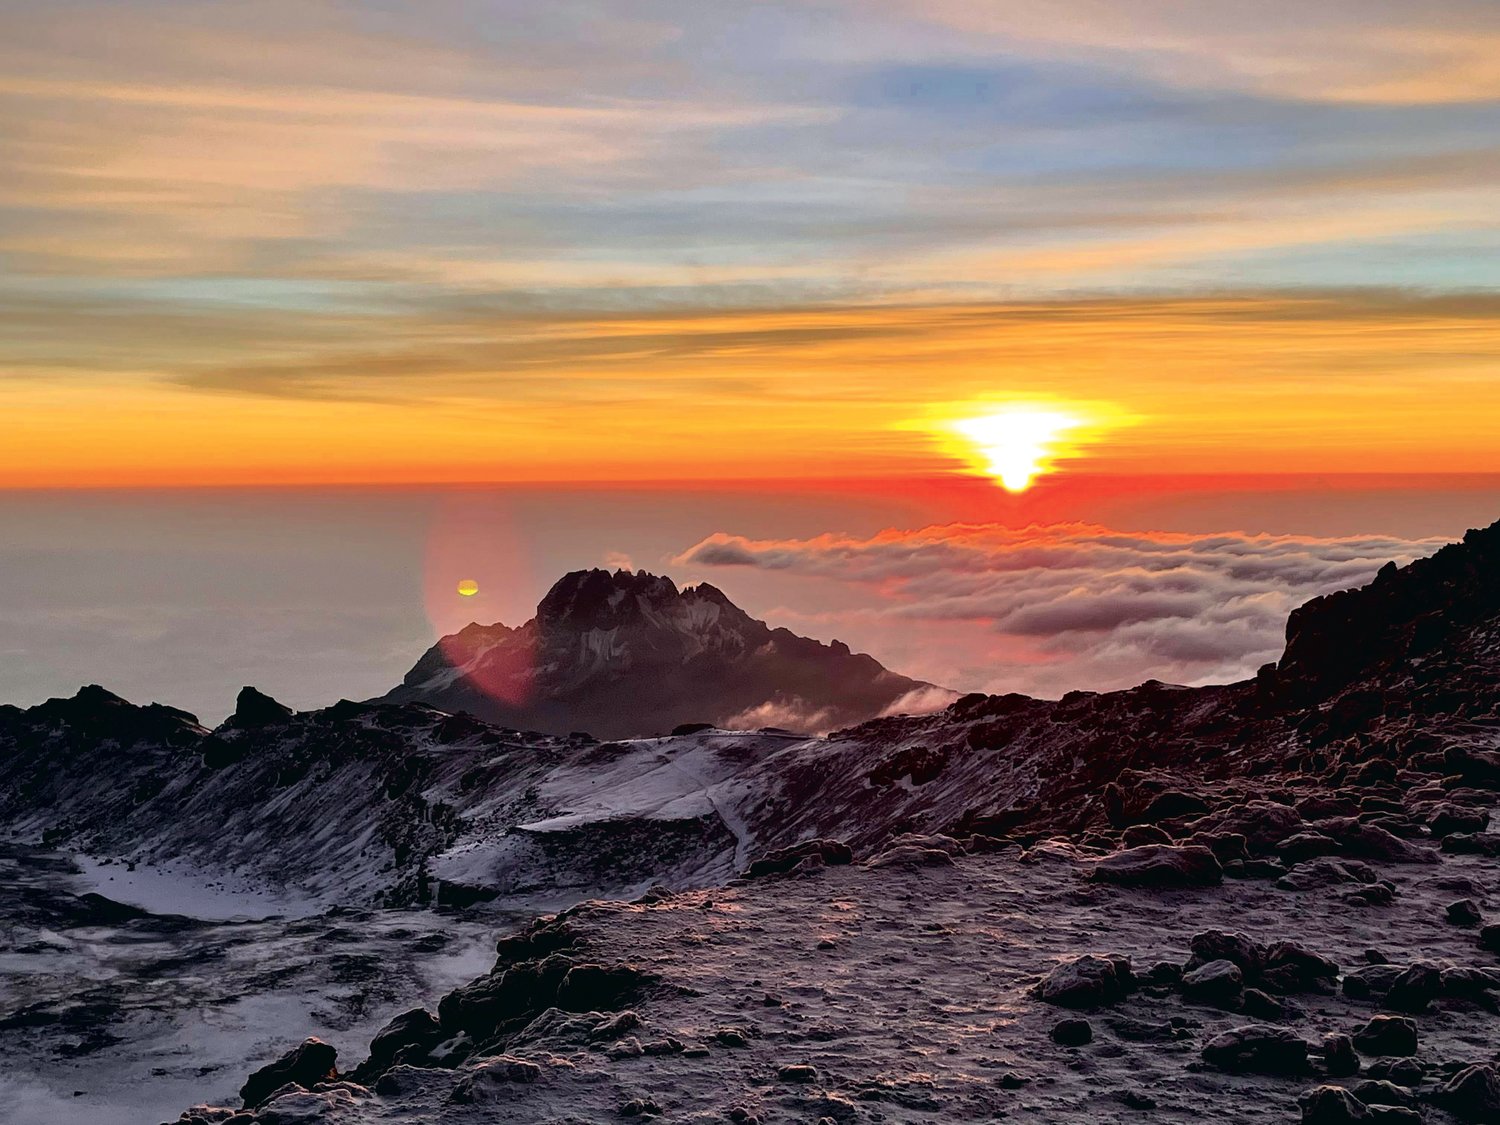 The sunrise is seen from the top of Mount Kilimanjaro on Thanksgiving morning in this photograph provided by Centralia resident Neal Kirby.  It is the highest mountain in Africa and the fourth most topographically prominent peak in the world.